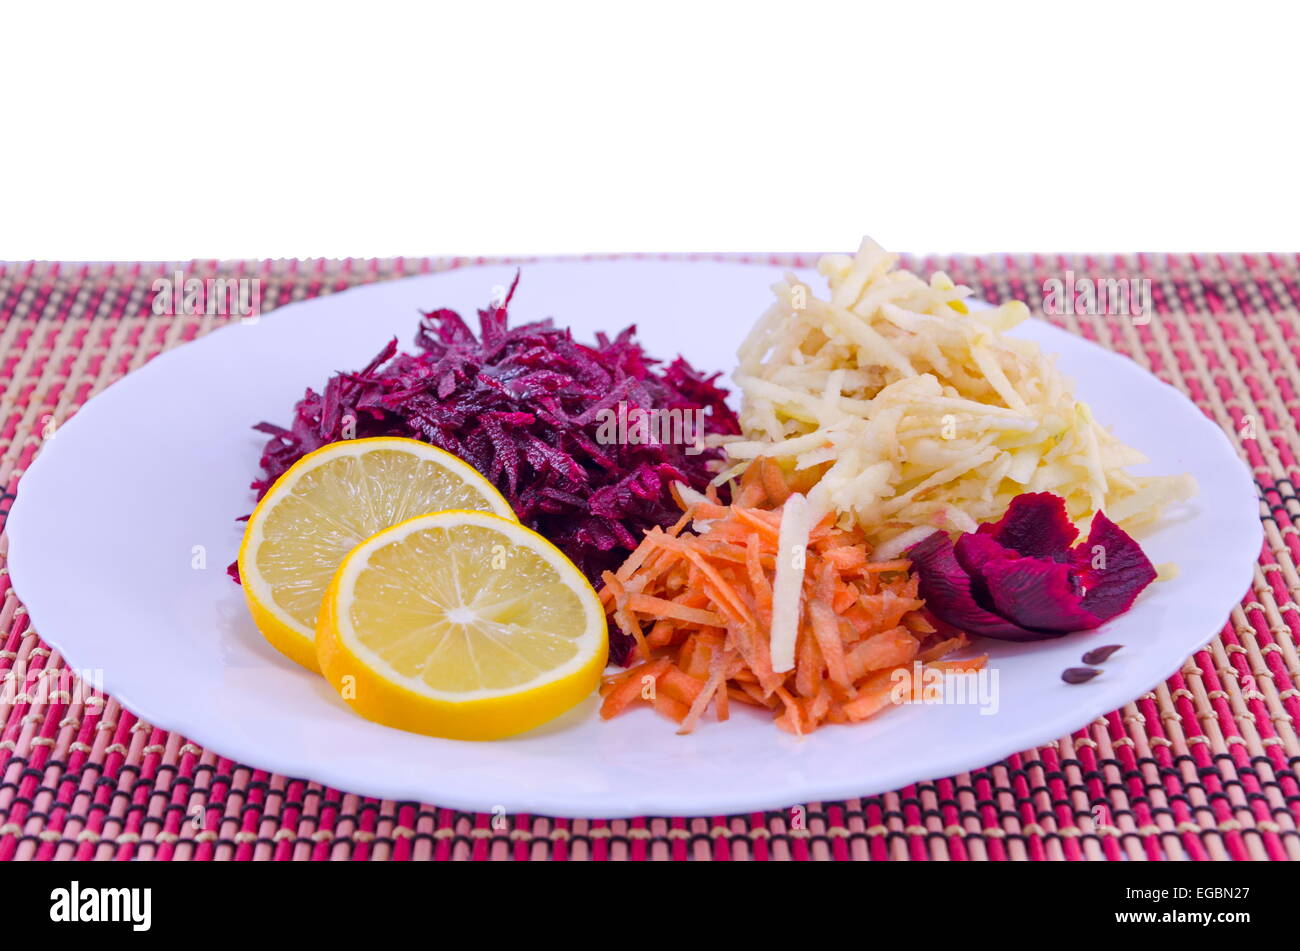 Grated carrots beet and apples on a white plate Stock Photo